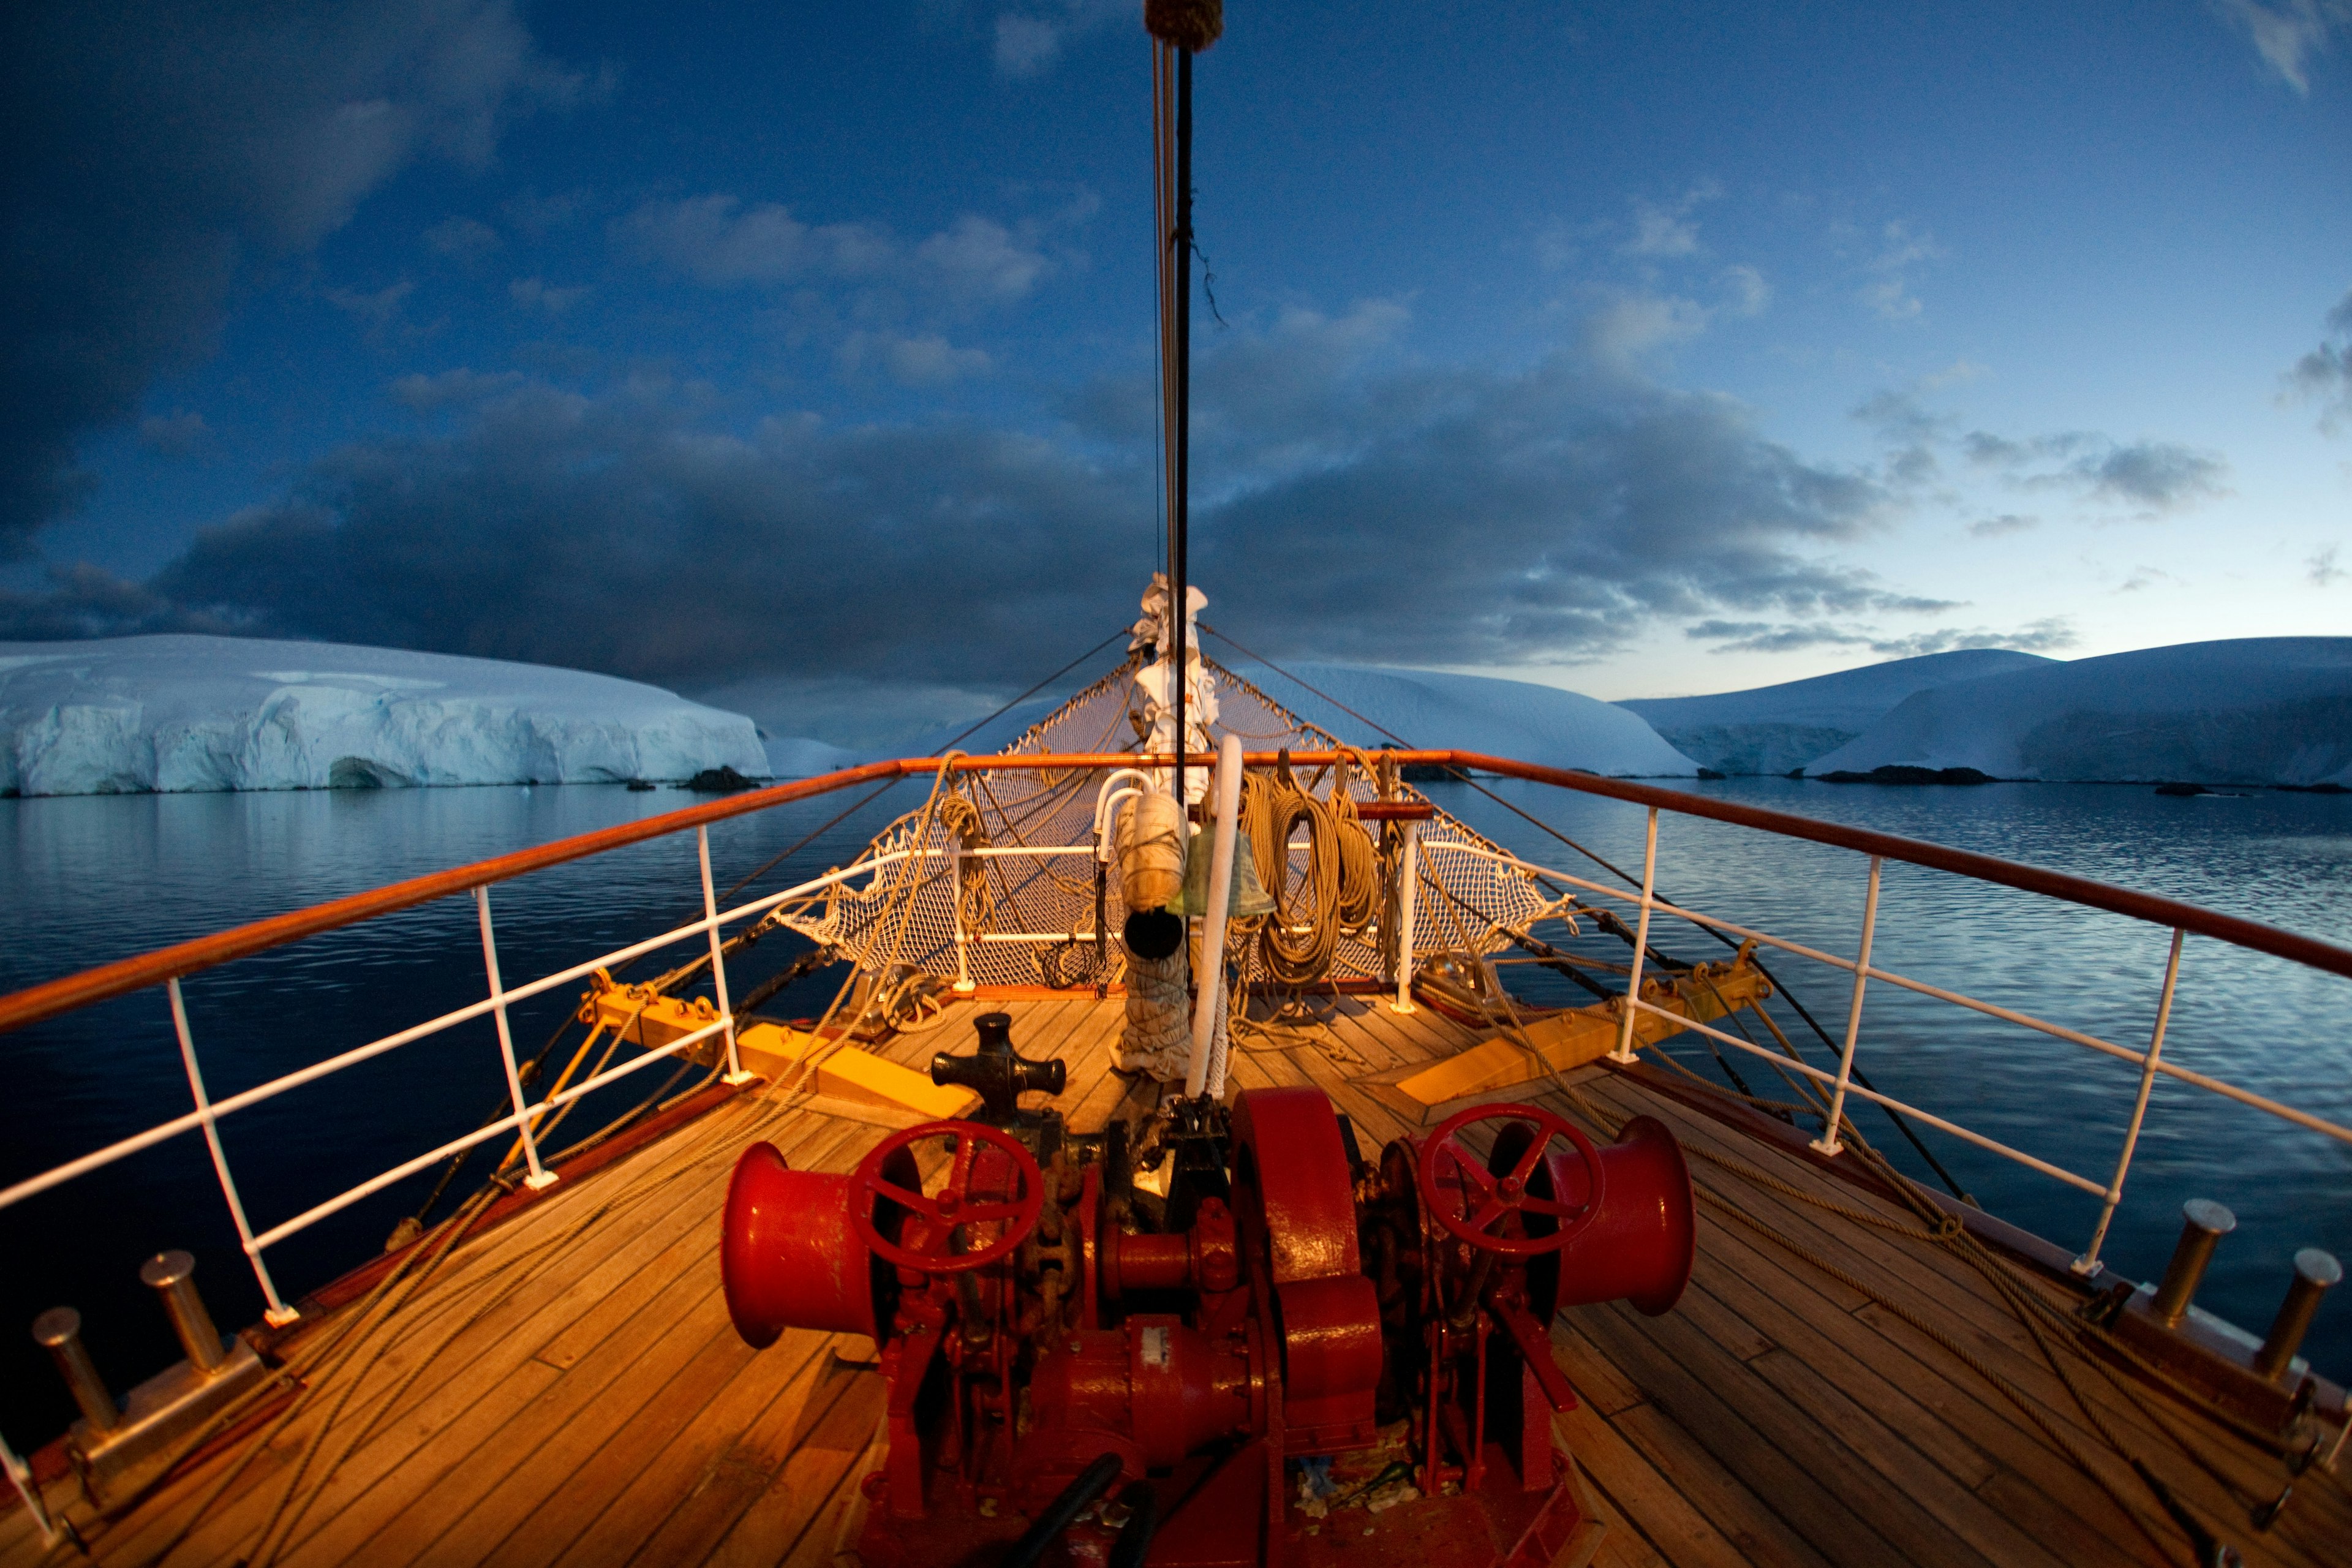 Deck of a boat with icebergs